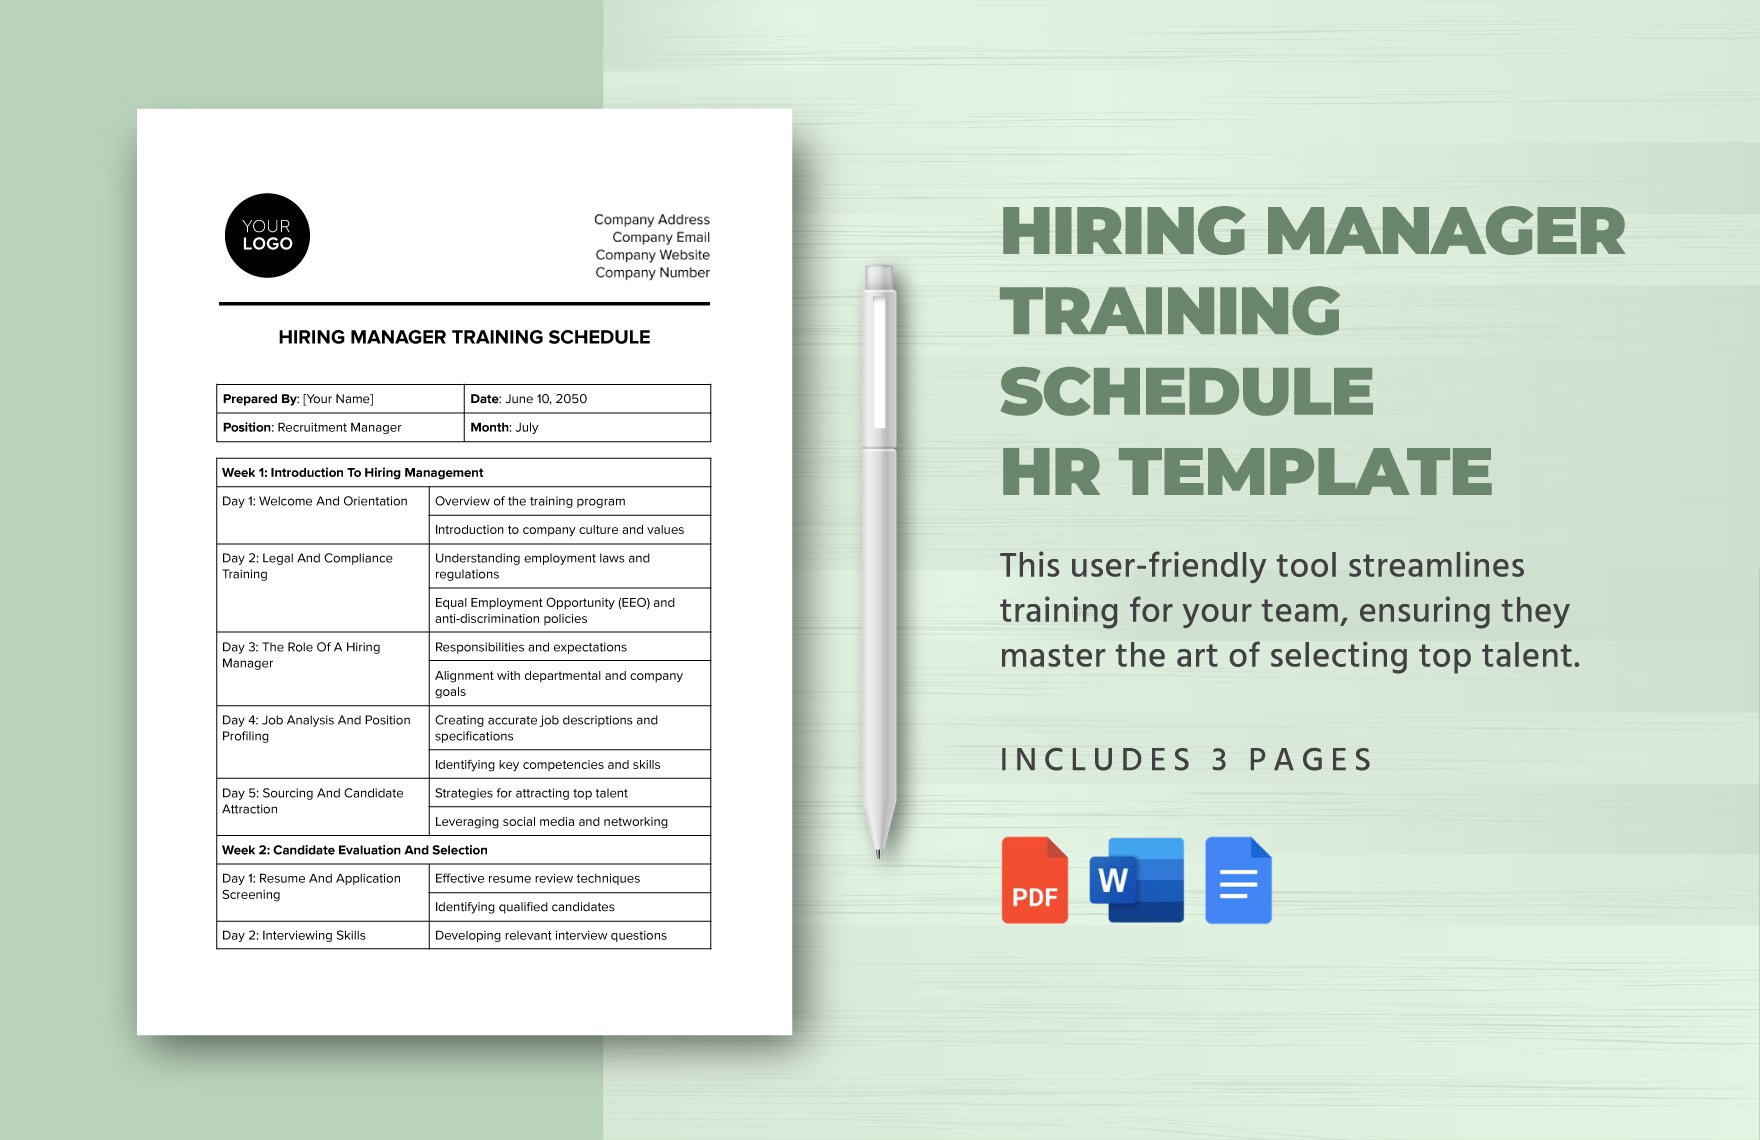 Hiring Manager Training Schedule HR Template in Word, Google Docs, PDF